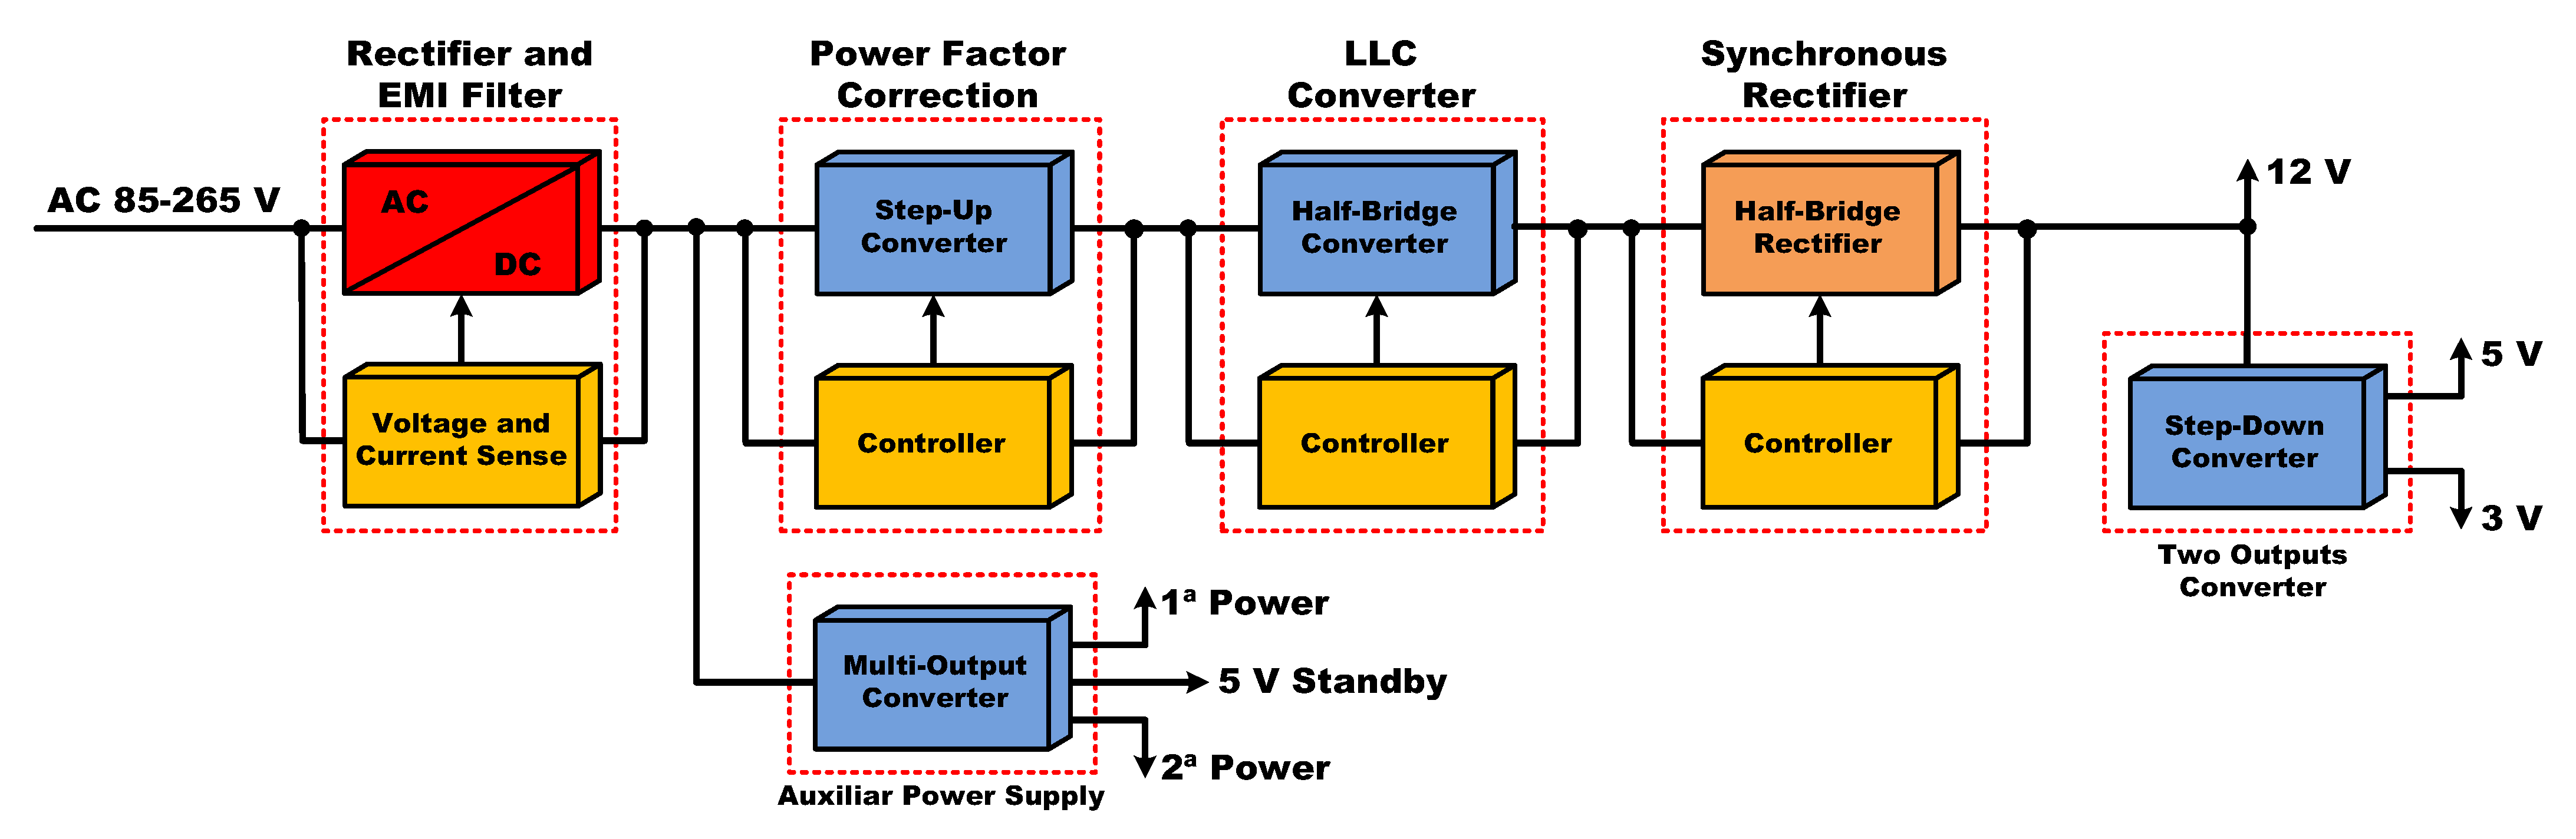 power supply - Design considerations when combining multiple DC DC